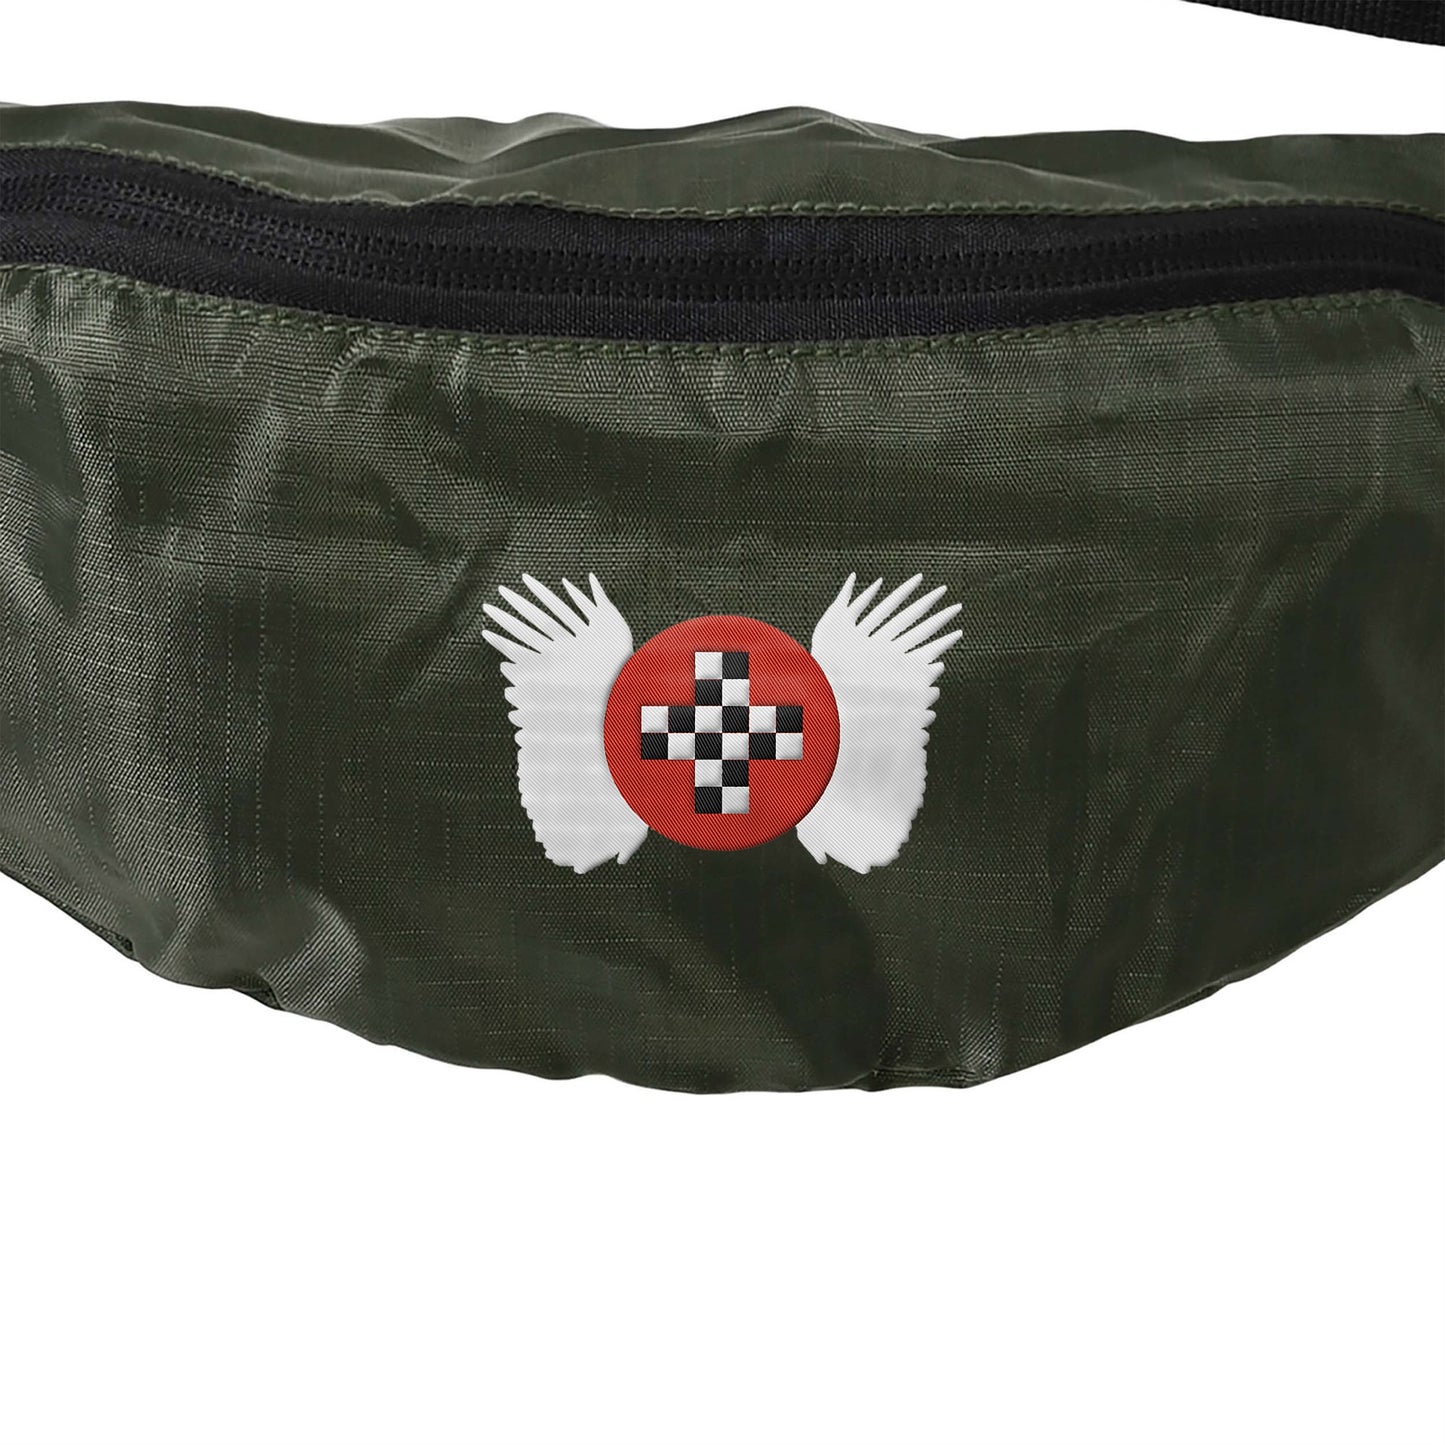 Cross Checkered Wing Embroidered Body Bag